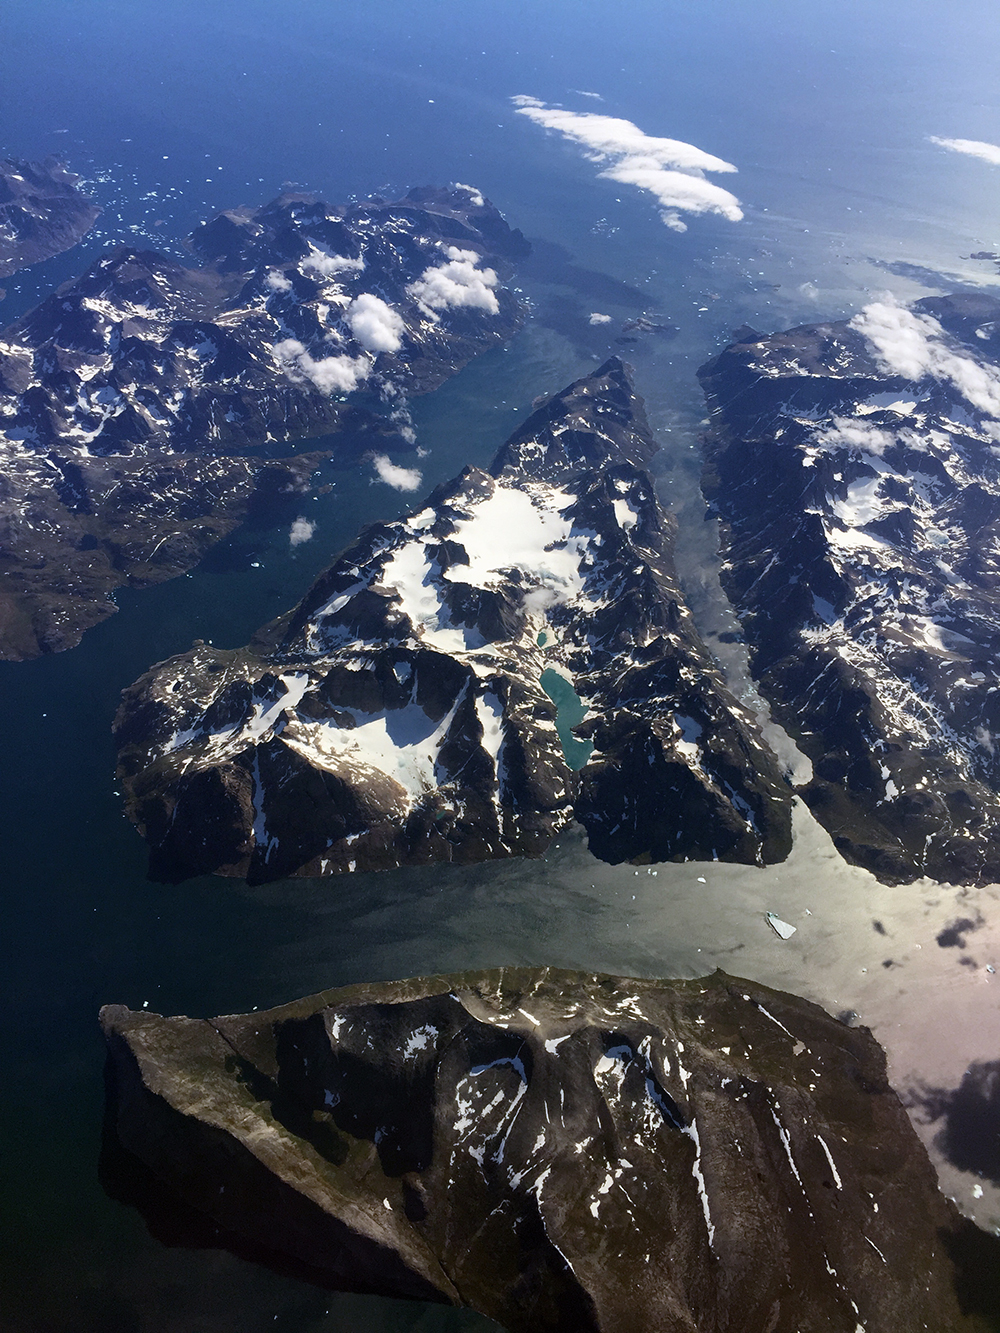 Ikeq Island on the southern tip of Greenland